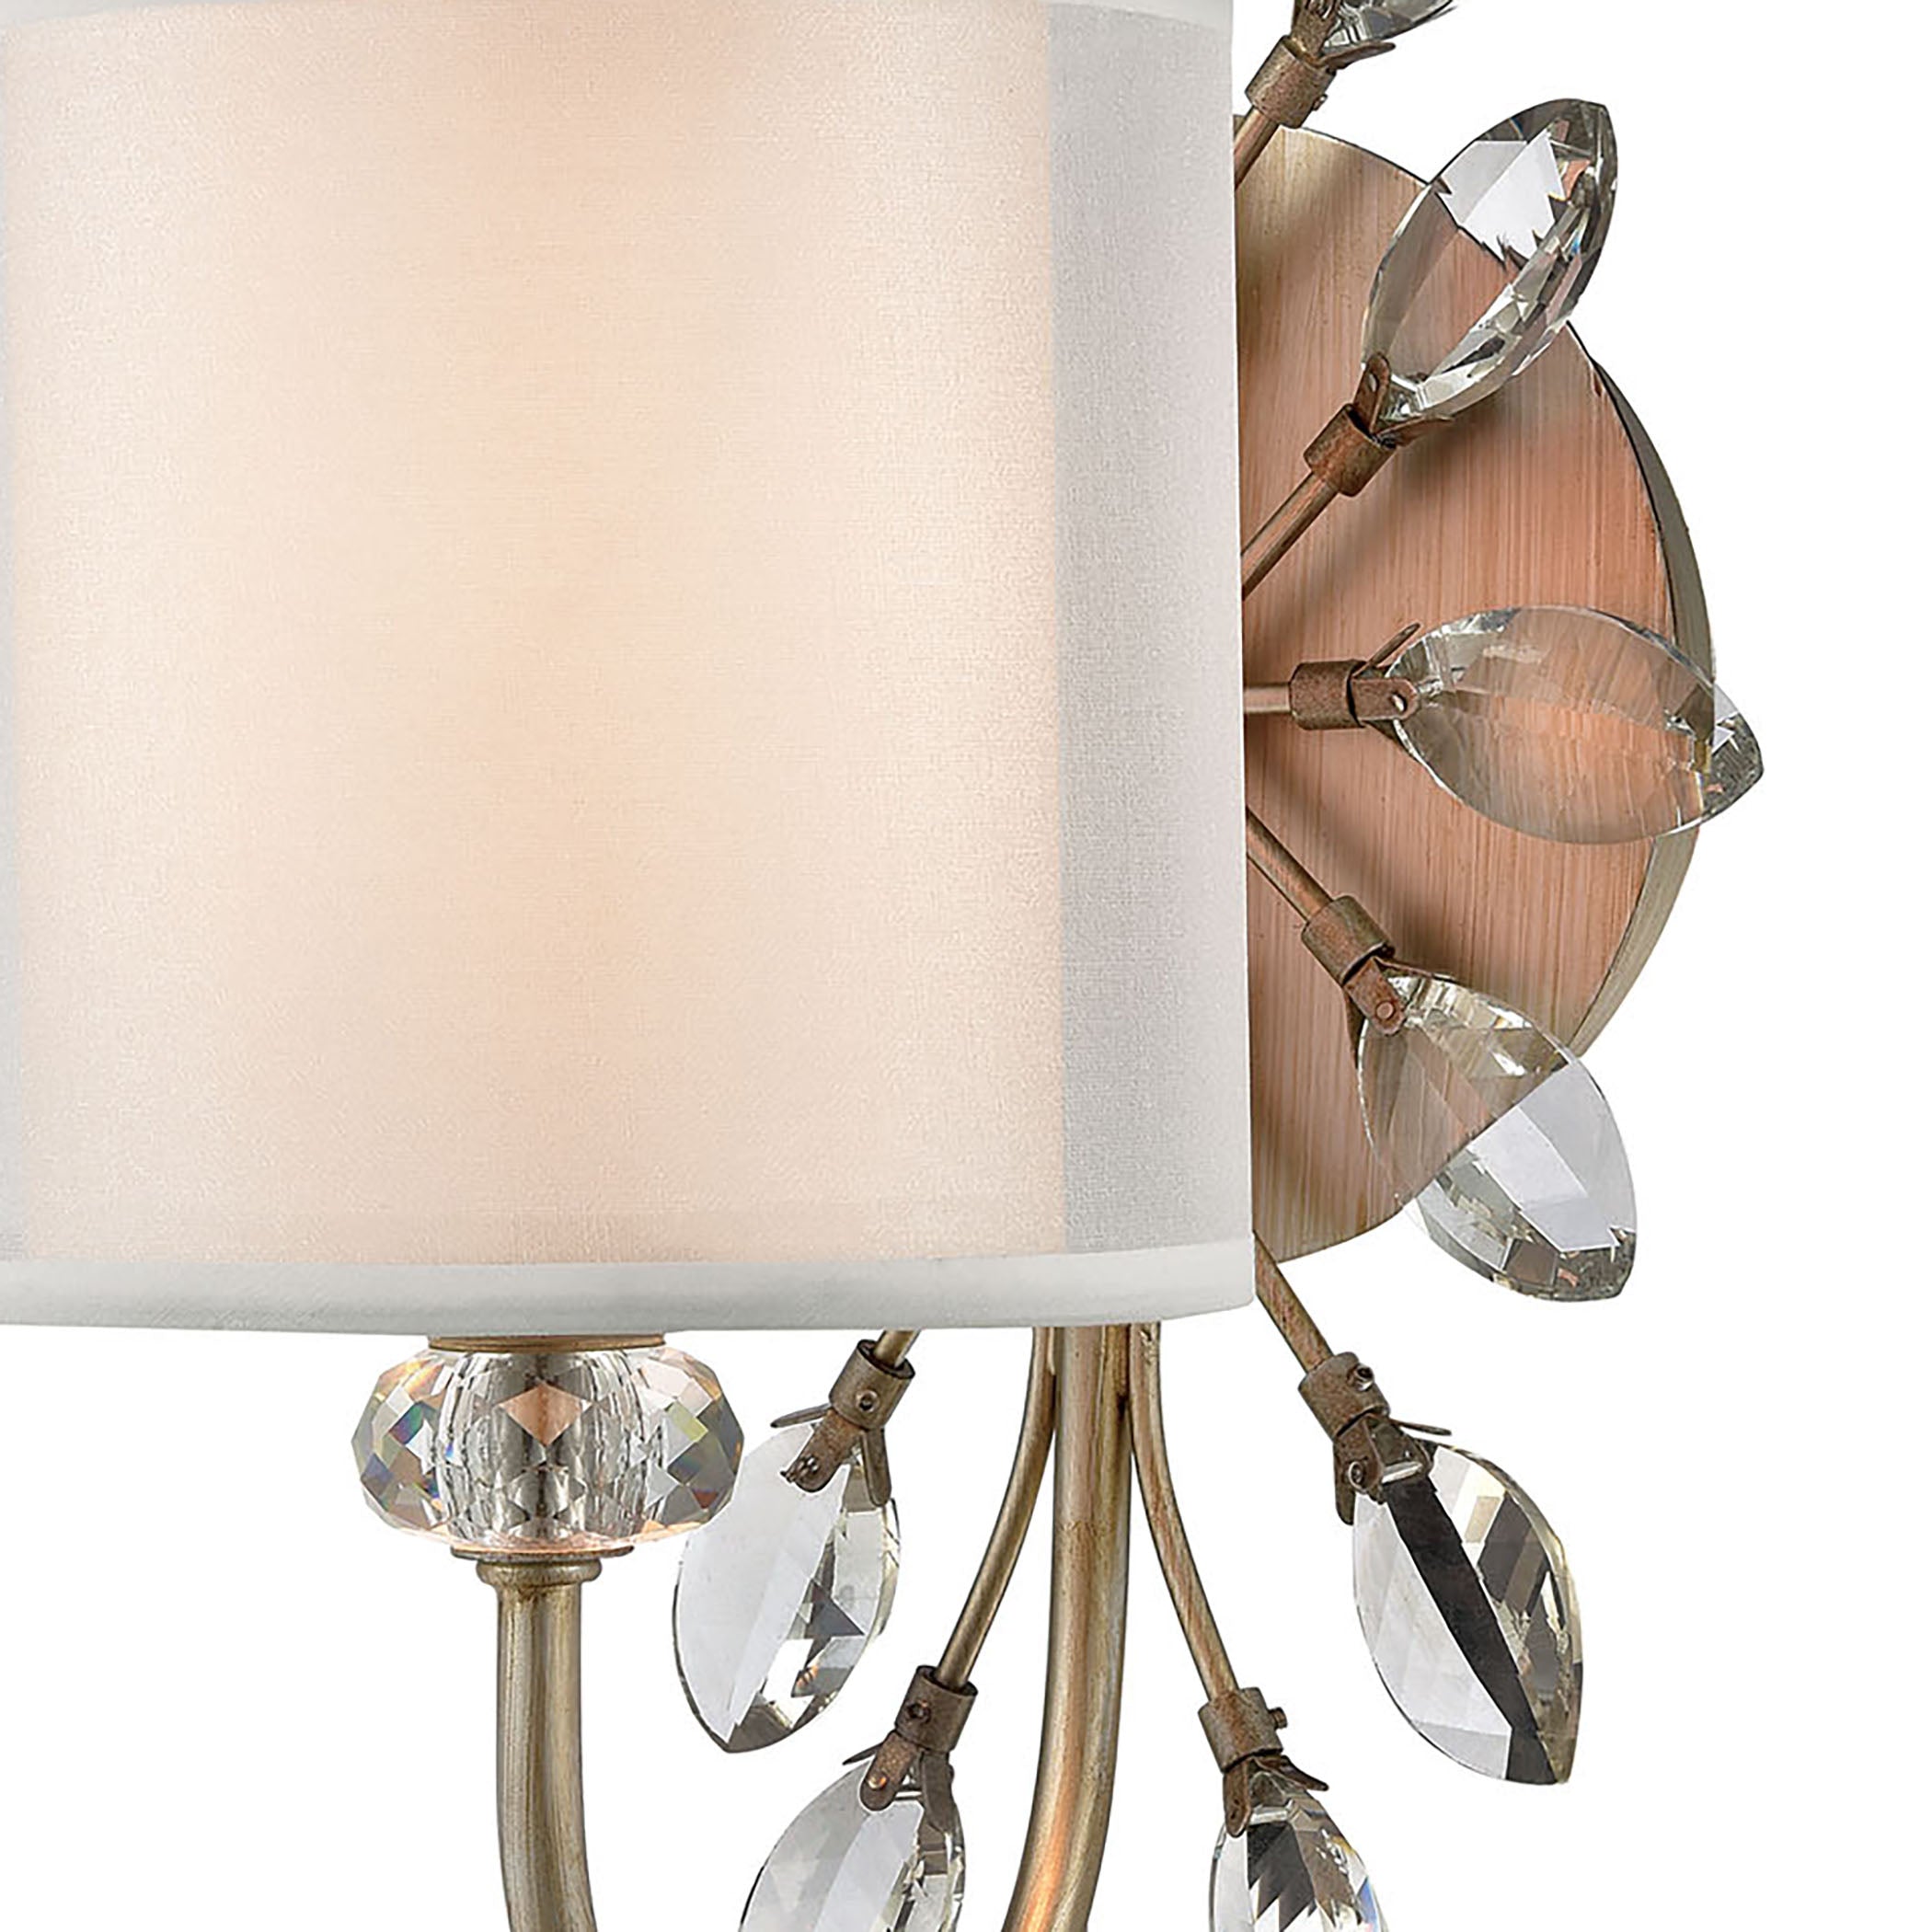 ELK Lighting 16276/1 Asbury 1-Light Vanity Light in Aged Silver with White Fabric Shade Inside Silver Organza Shade